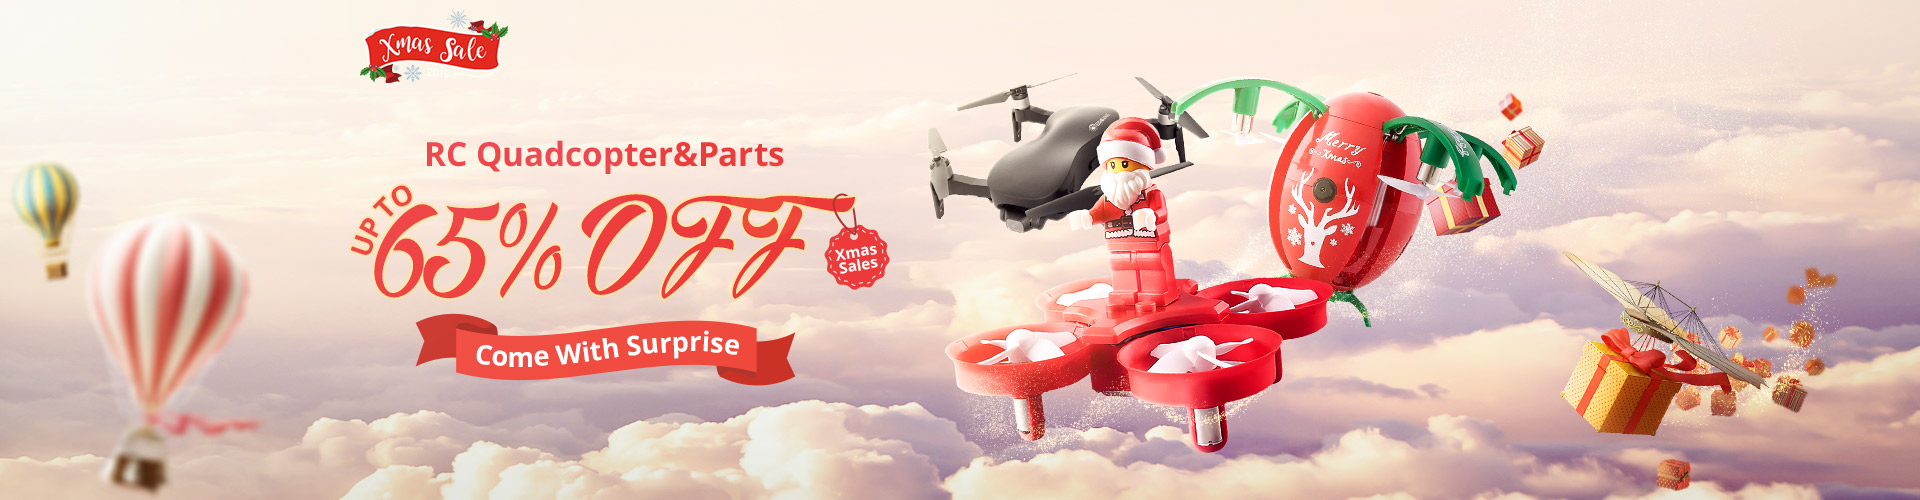 Up to 65% OFF RC Quadcopter&Parts Xmas Sales